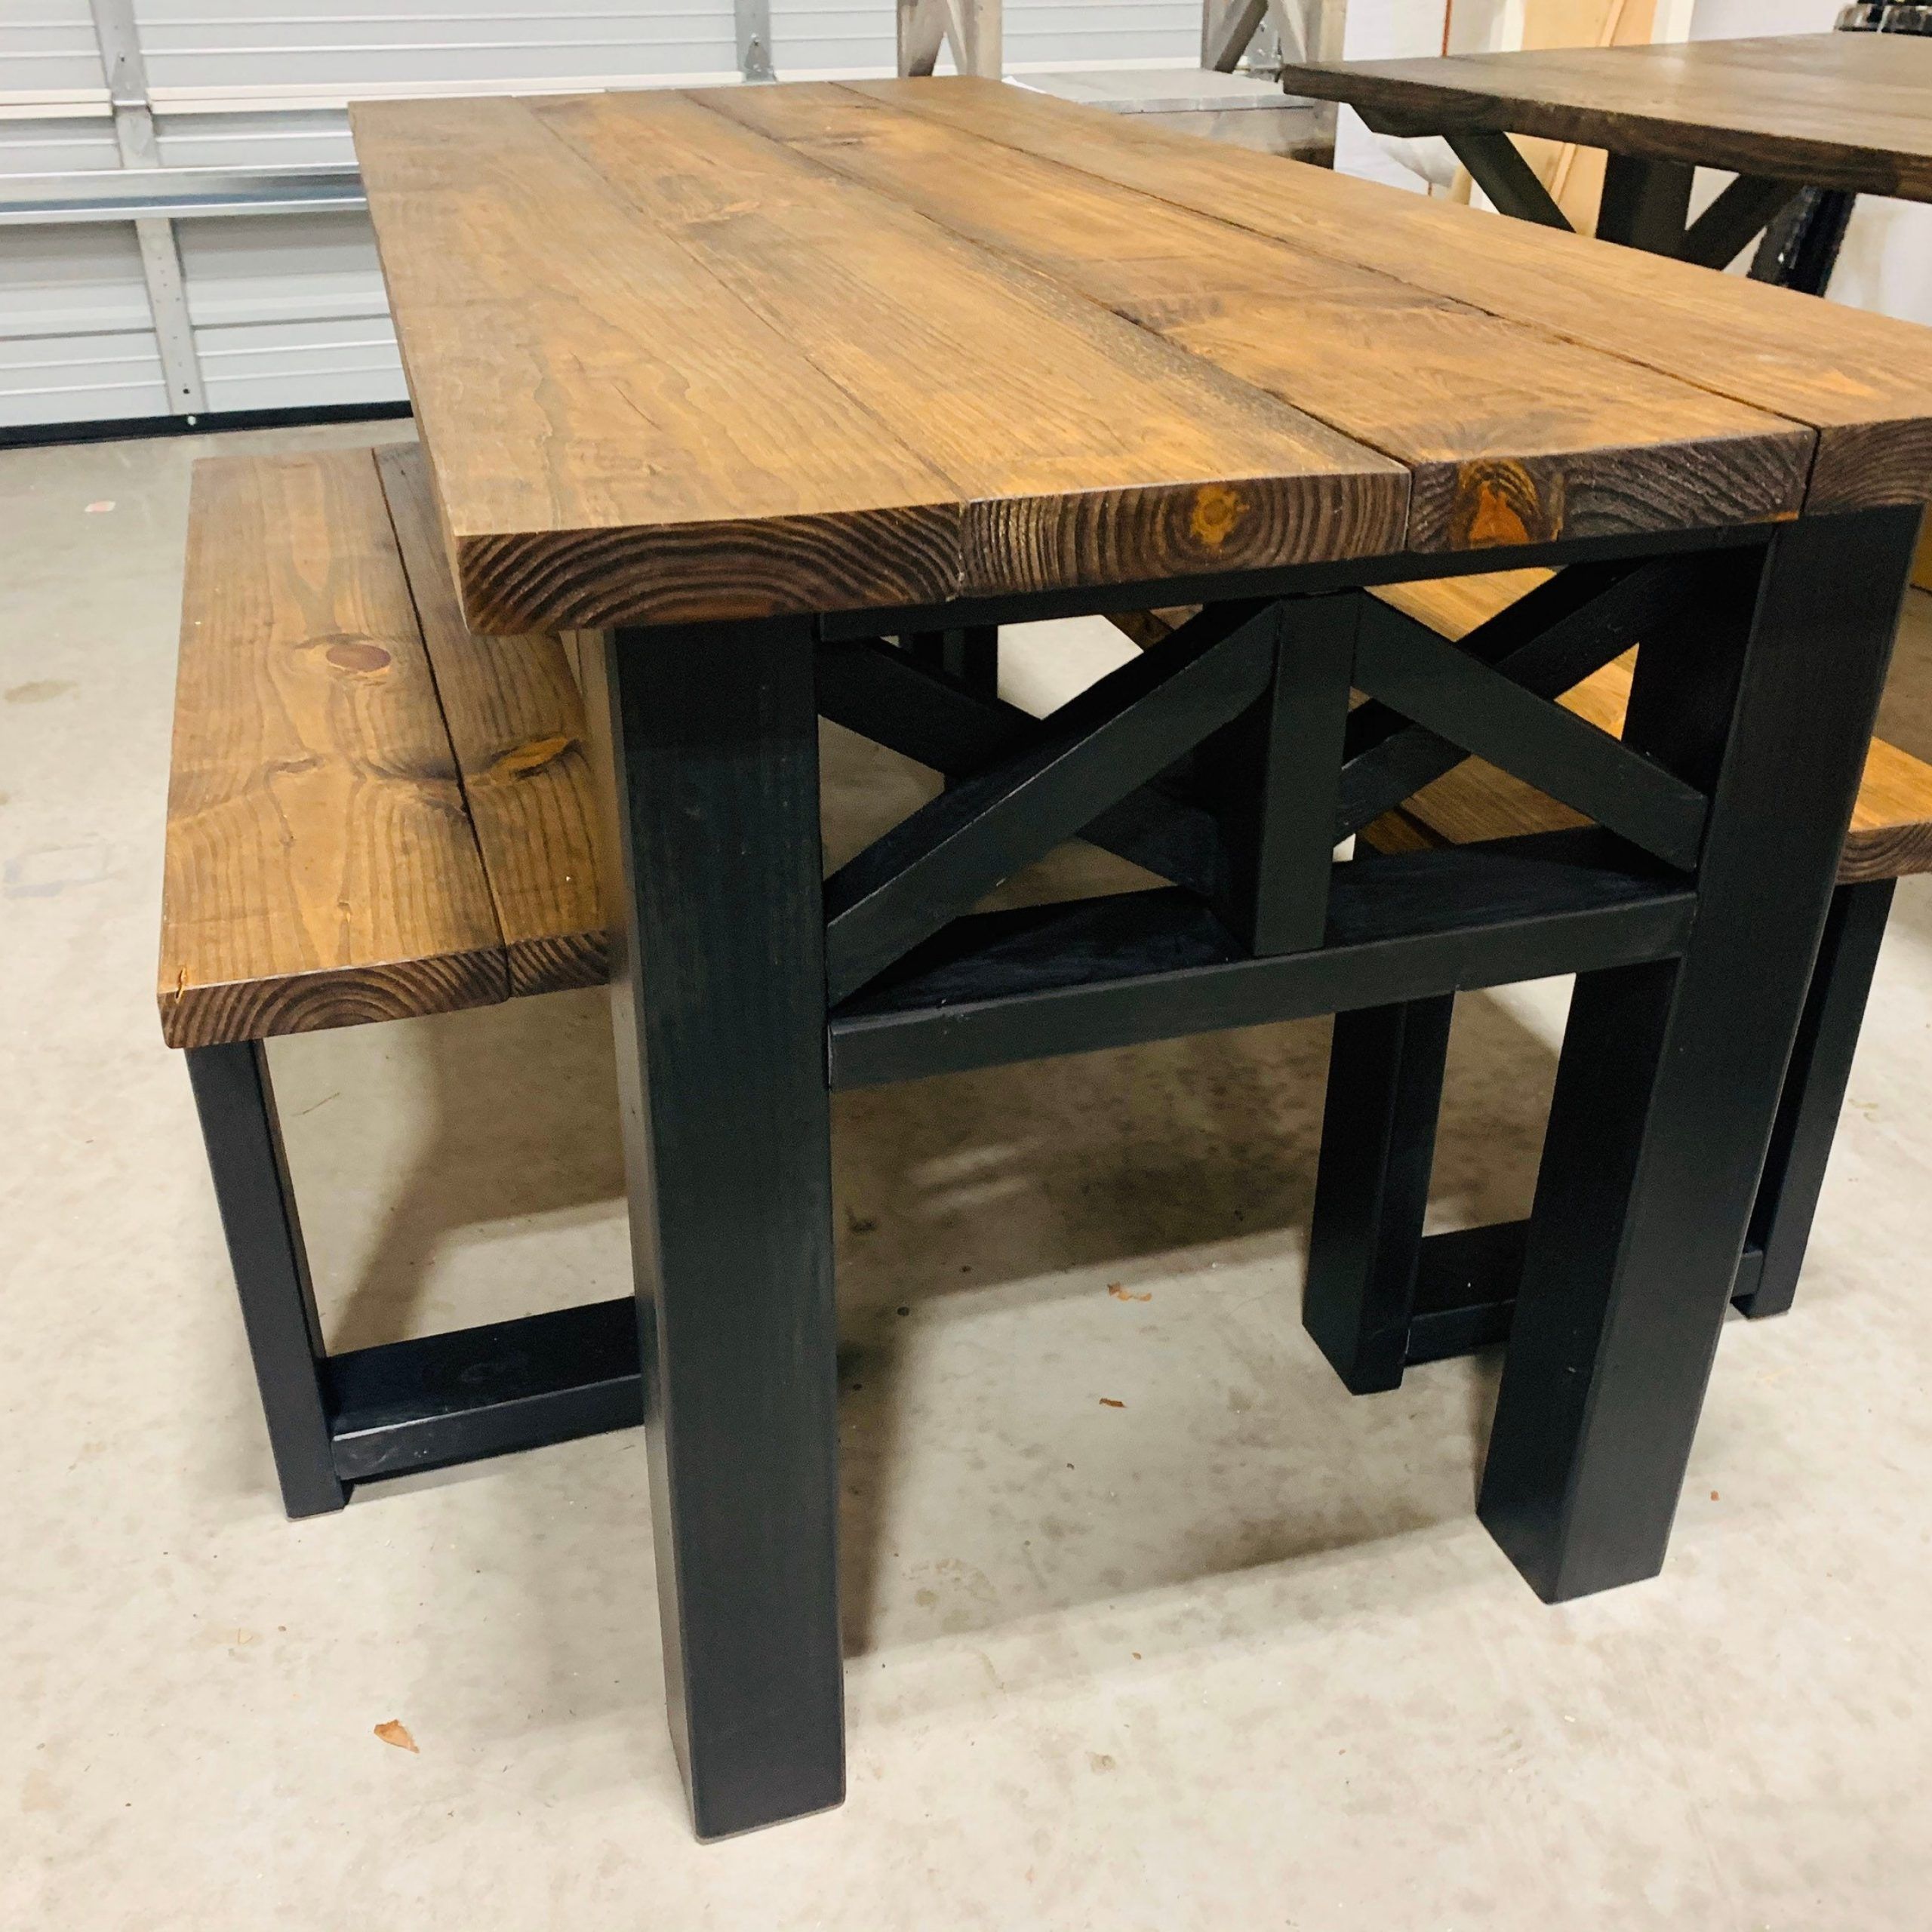 Rustic Wooden Farmhouse Table Set With Provincial Brown Top And True Throughout Wood And Dark Bronze Criss Cross Desks (Photo 12 of 15)